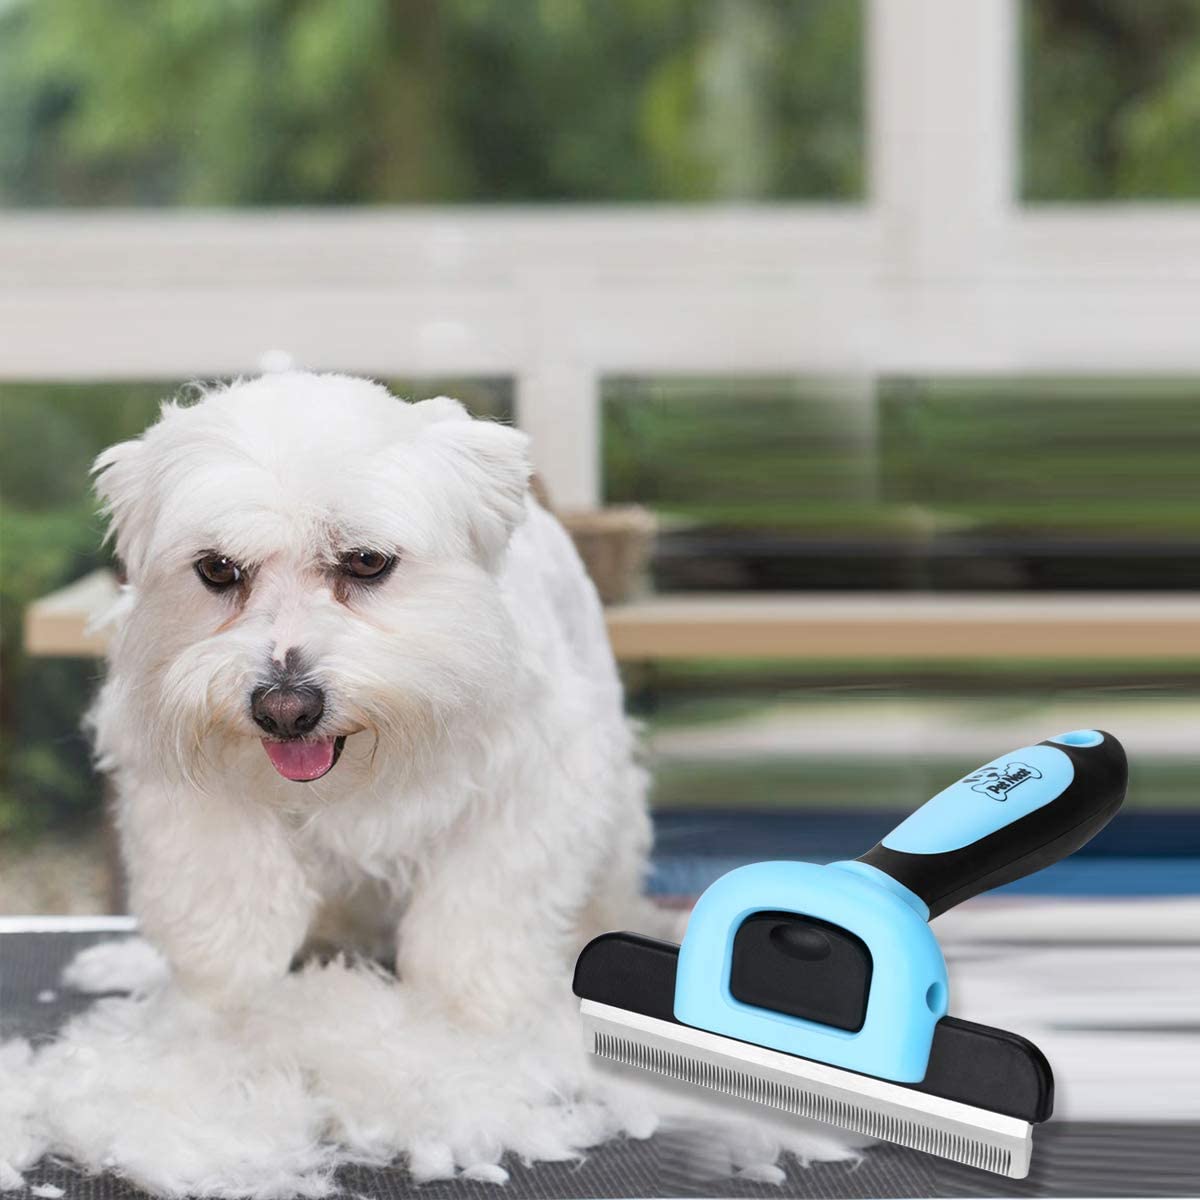 Pet Neat Pet Grooming Brush Effectively Reduces Shedding by Up to 95% Professional Deshedding Tool for Dogs and Cats - (For 8 piece(s))